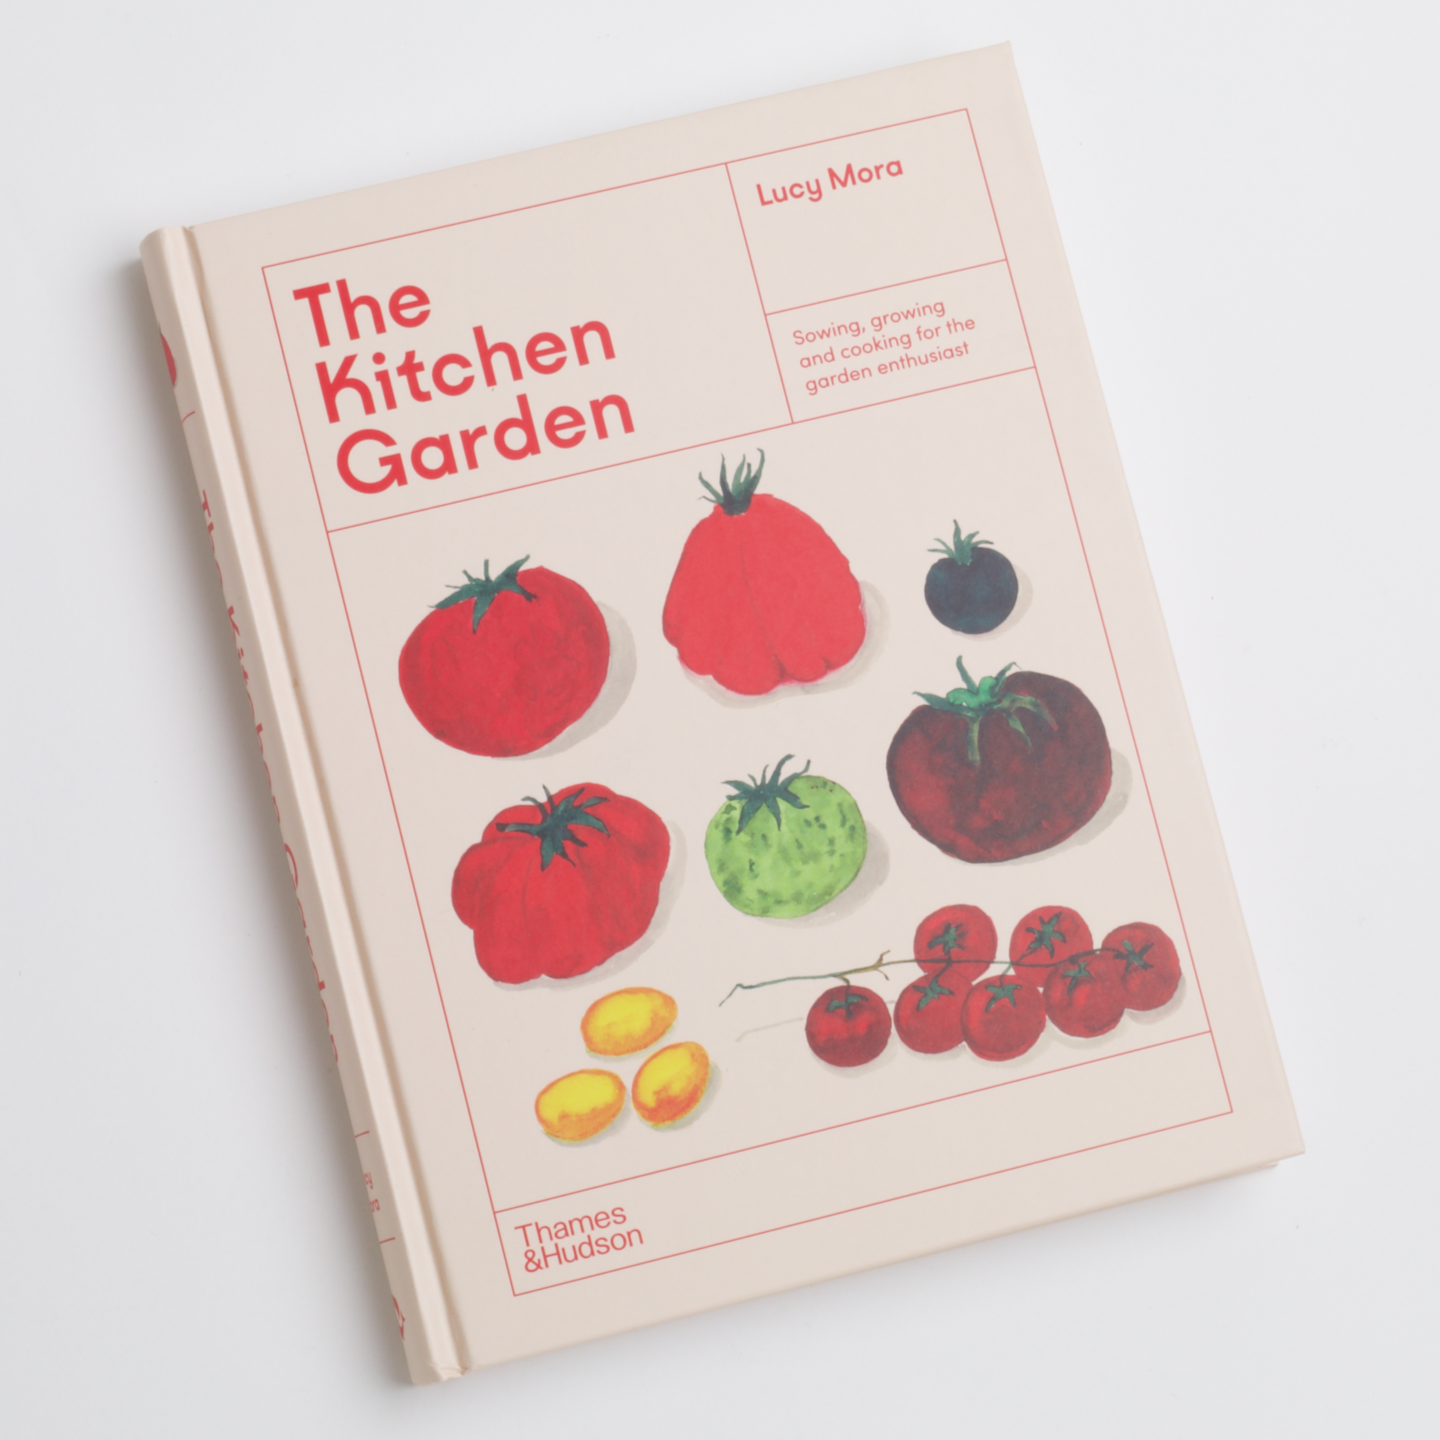 Cover of The Kitchen Garden cookbook with vegetables on it